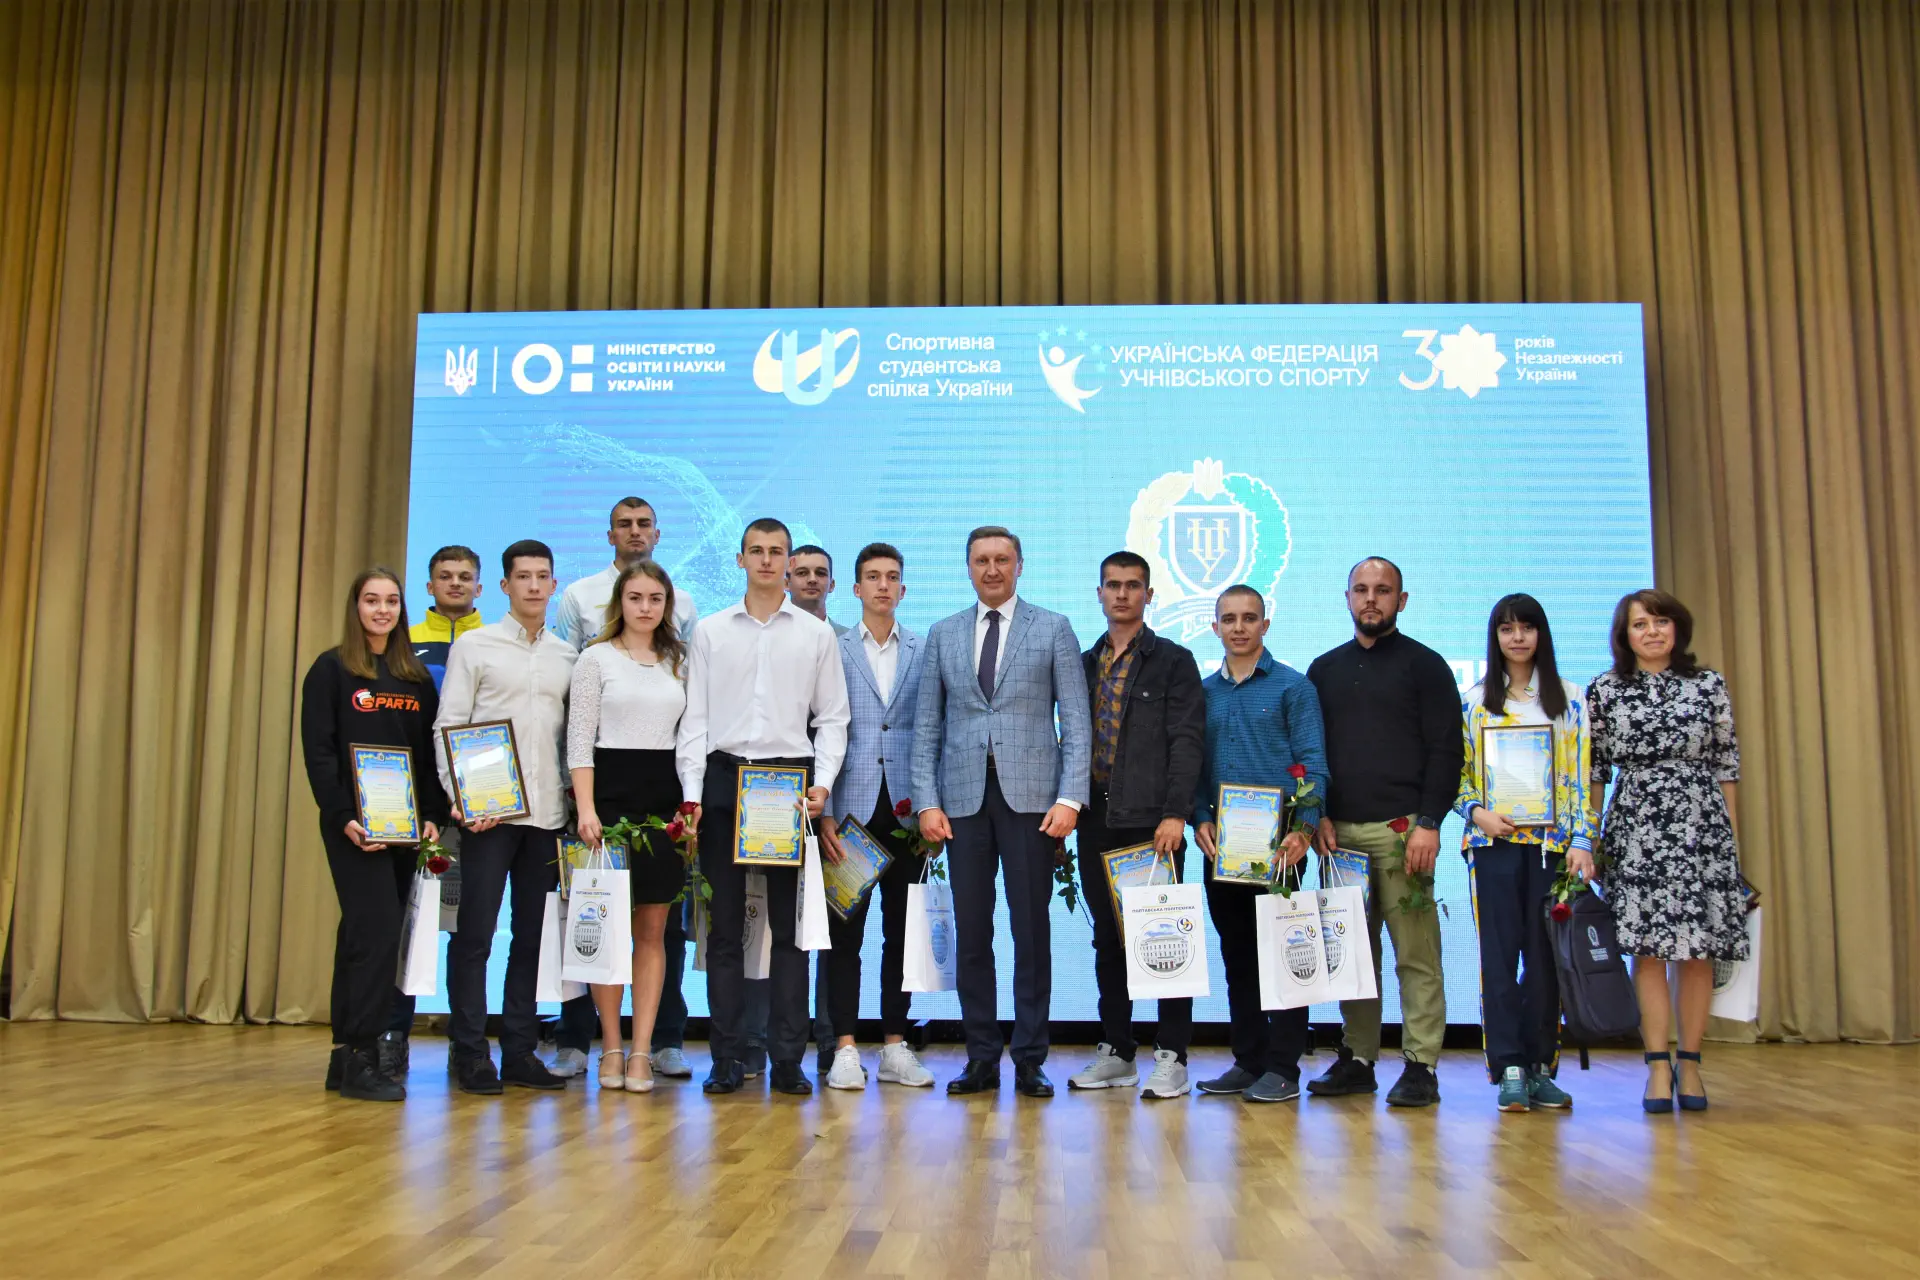 15 champion students are awarded honours for the Day of Physical Culture and Sport